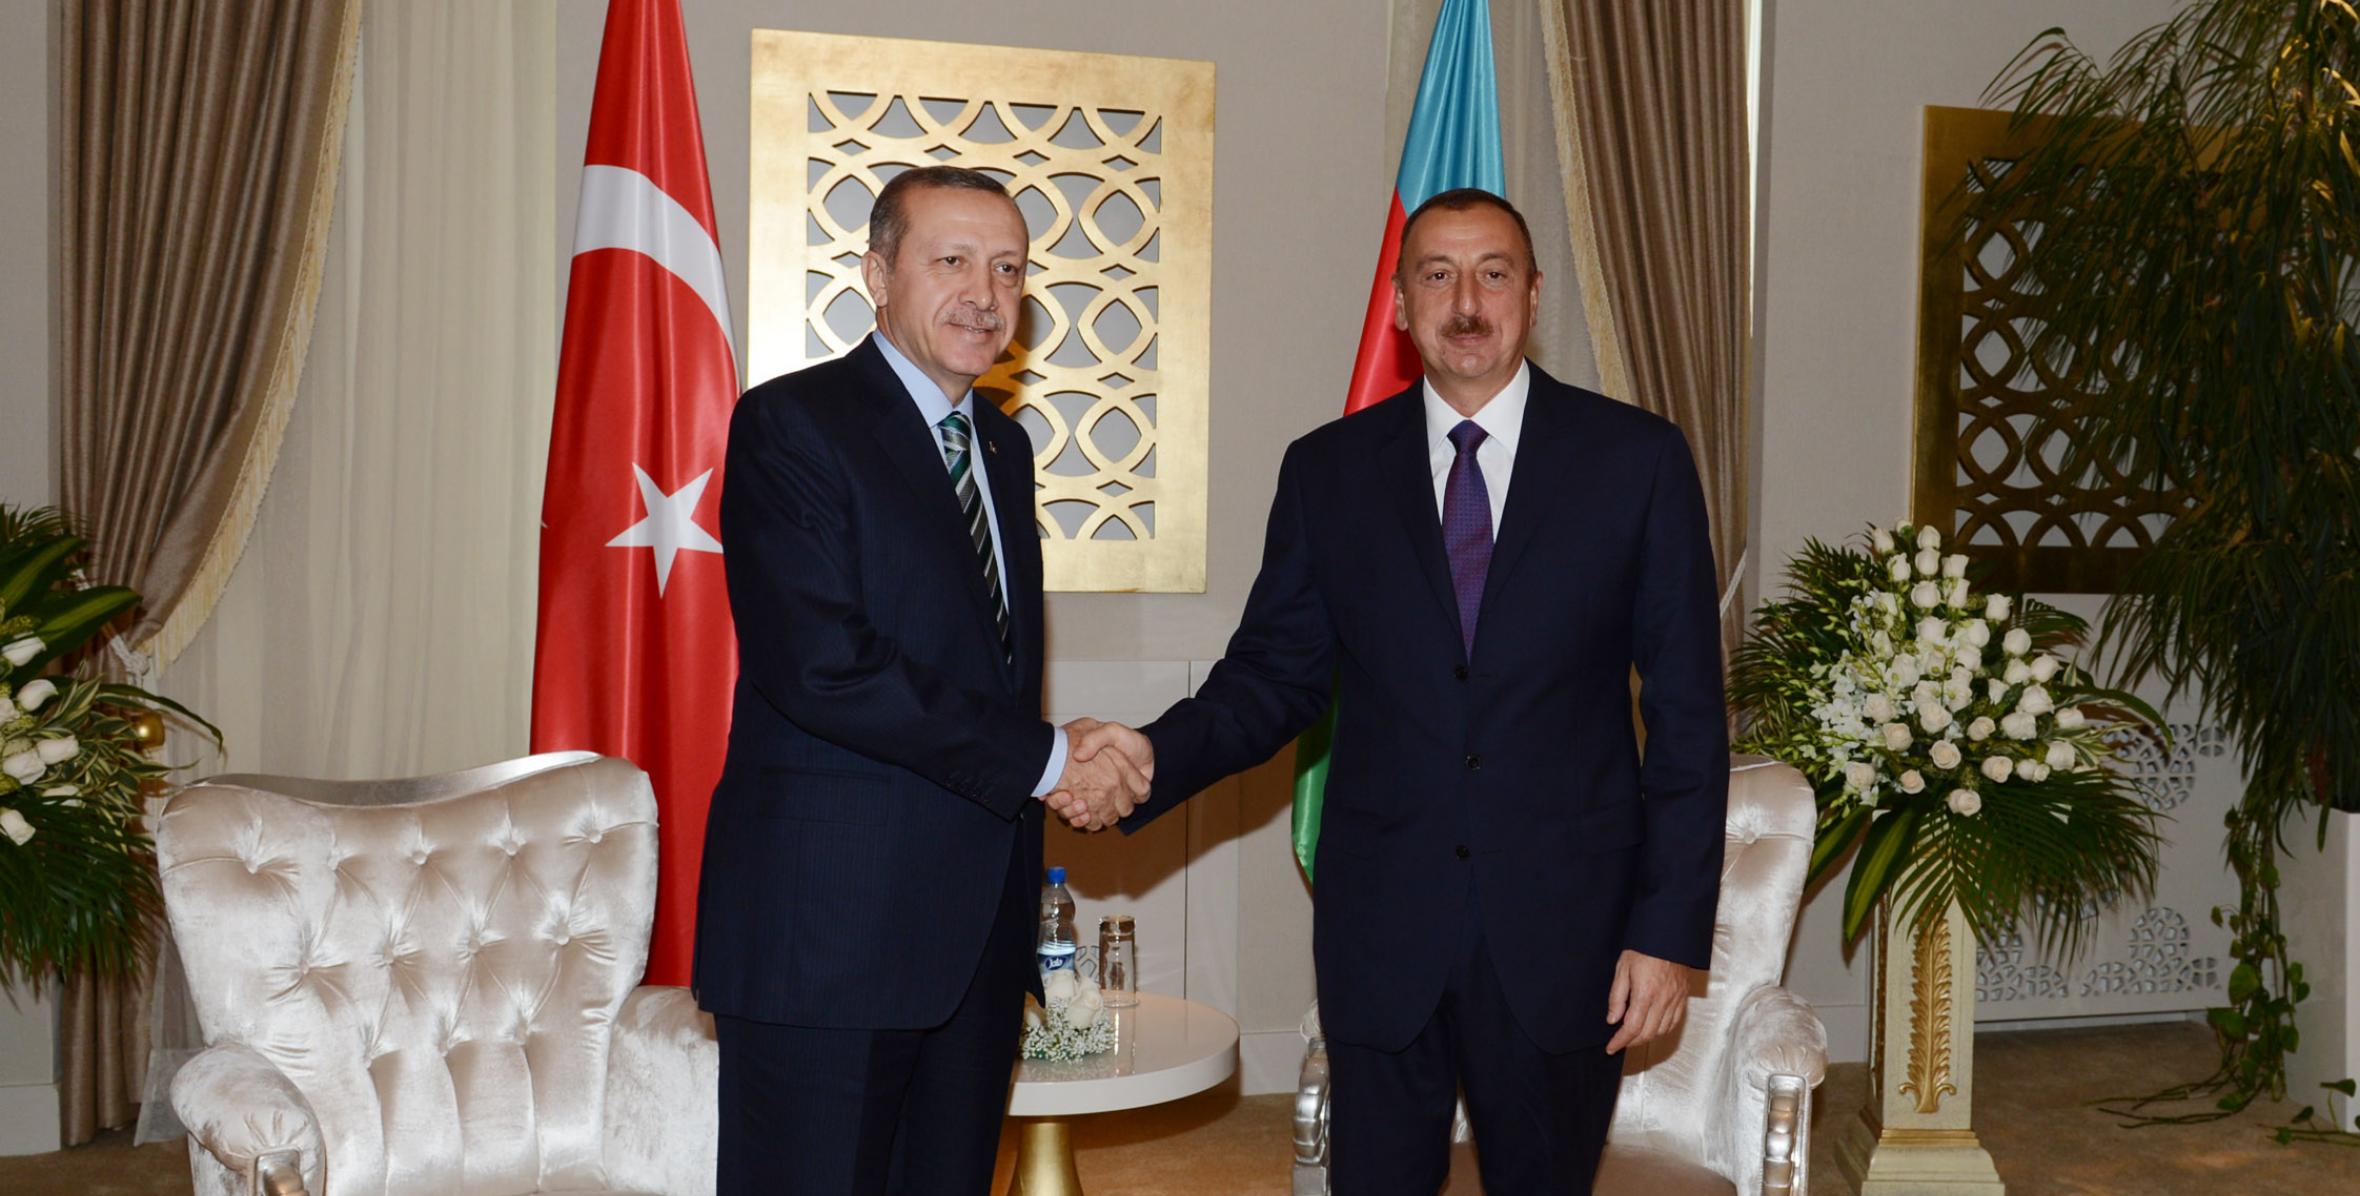 Ilham Aliyev and Prime Minister of Turkey Recep Tayyip Erdogan held a face-to-face meeting